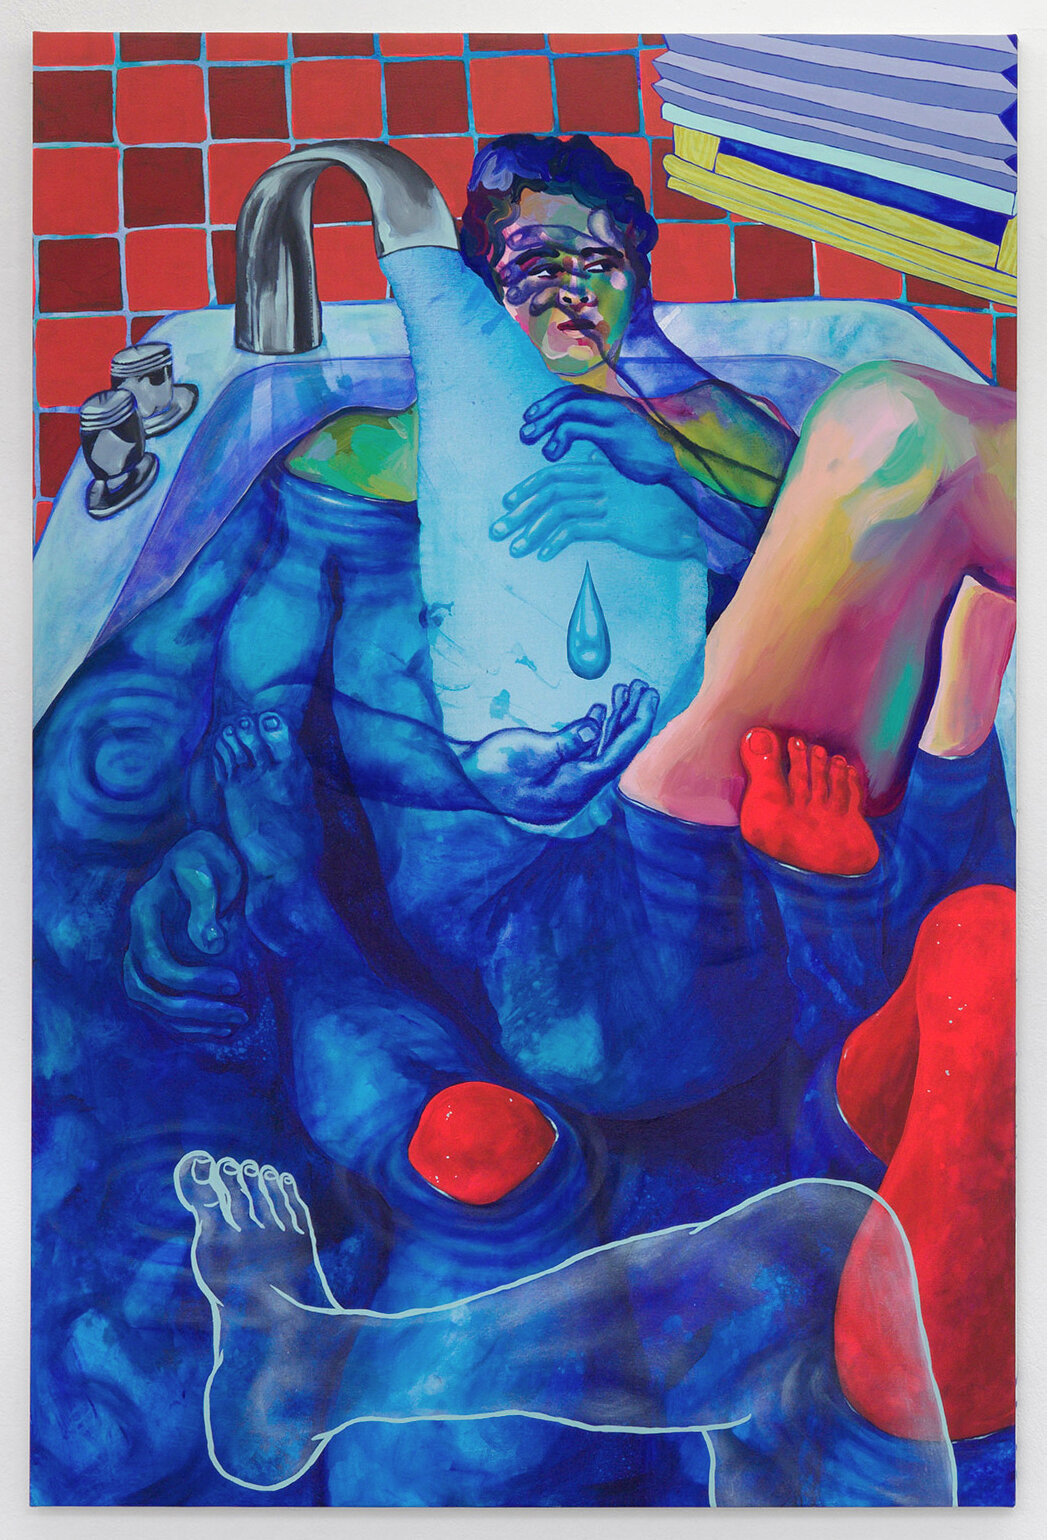   The Soak that Stained Both of Us   acrylic, oil and vinyl emulsion on canvas  48 x 72 in / 122 x 183 cm   